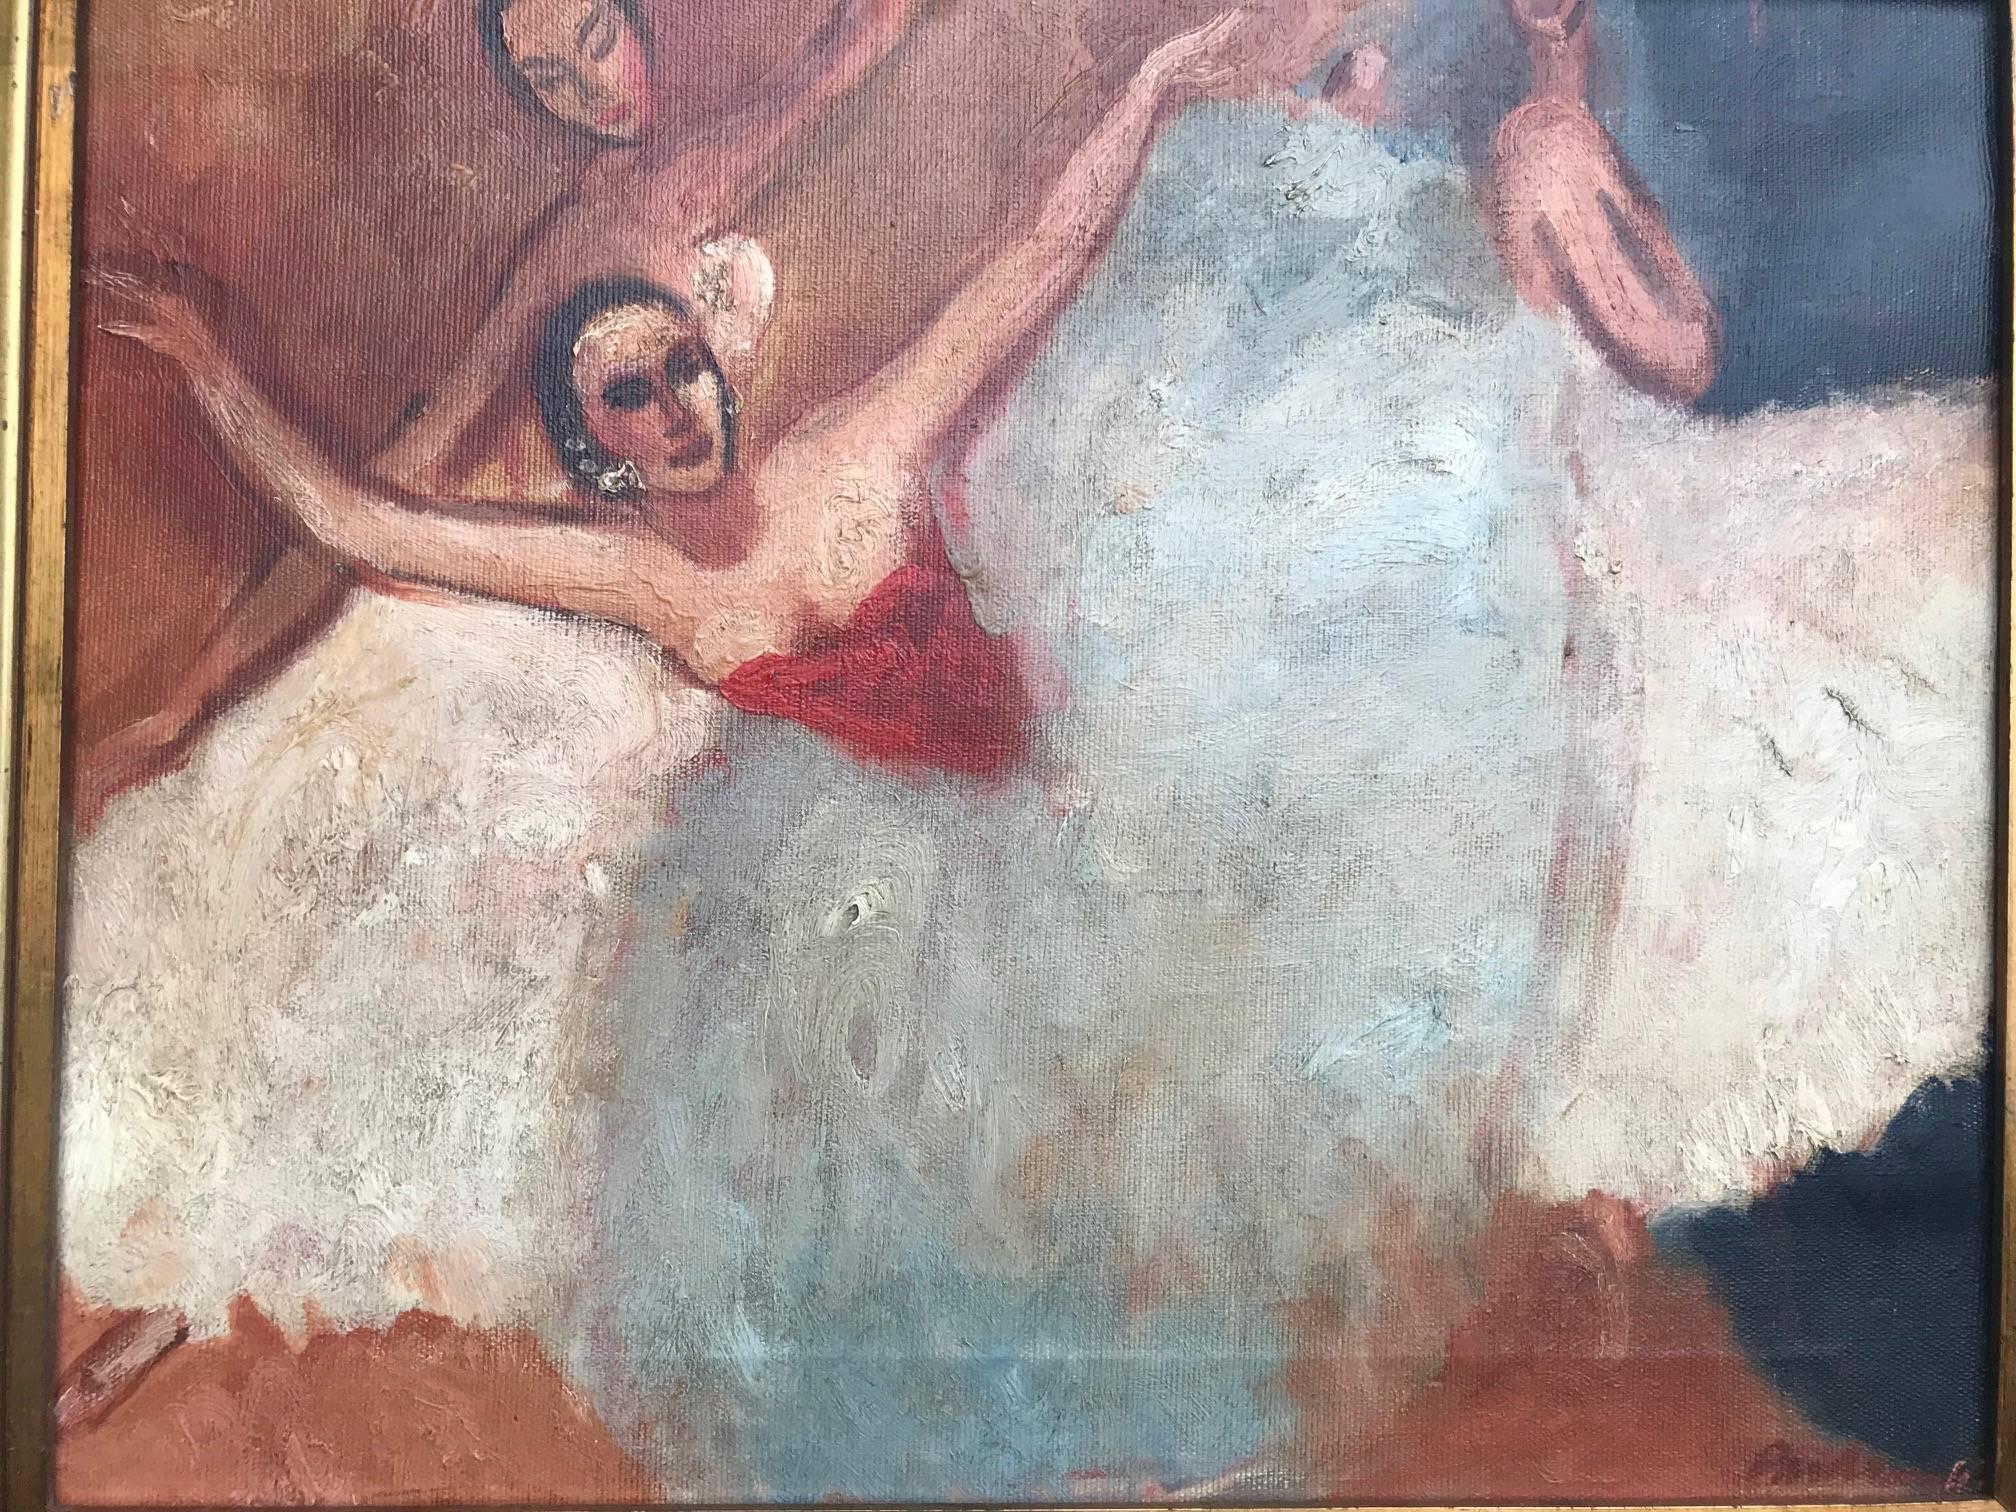 A very good example and rare oil on canvas of Ballerinas by the 20th century British artist Mary Audsley (1919-2008). Mary Audsley studied at Westminster School of Art, where she also taught for a while. Her teachers included Mark Gertler and